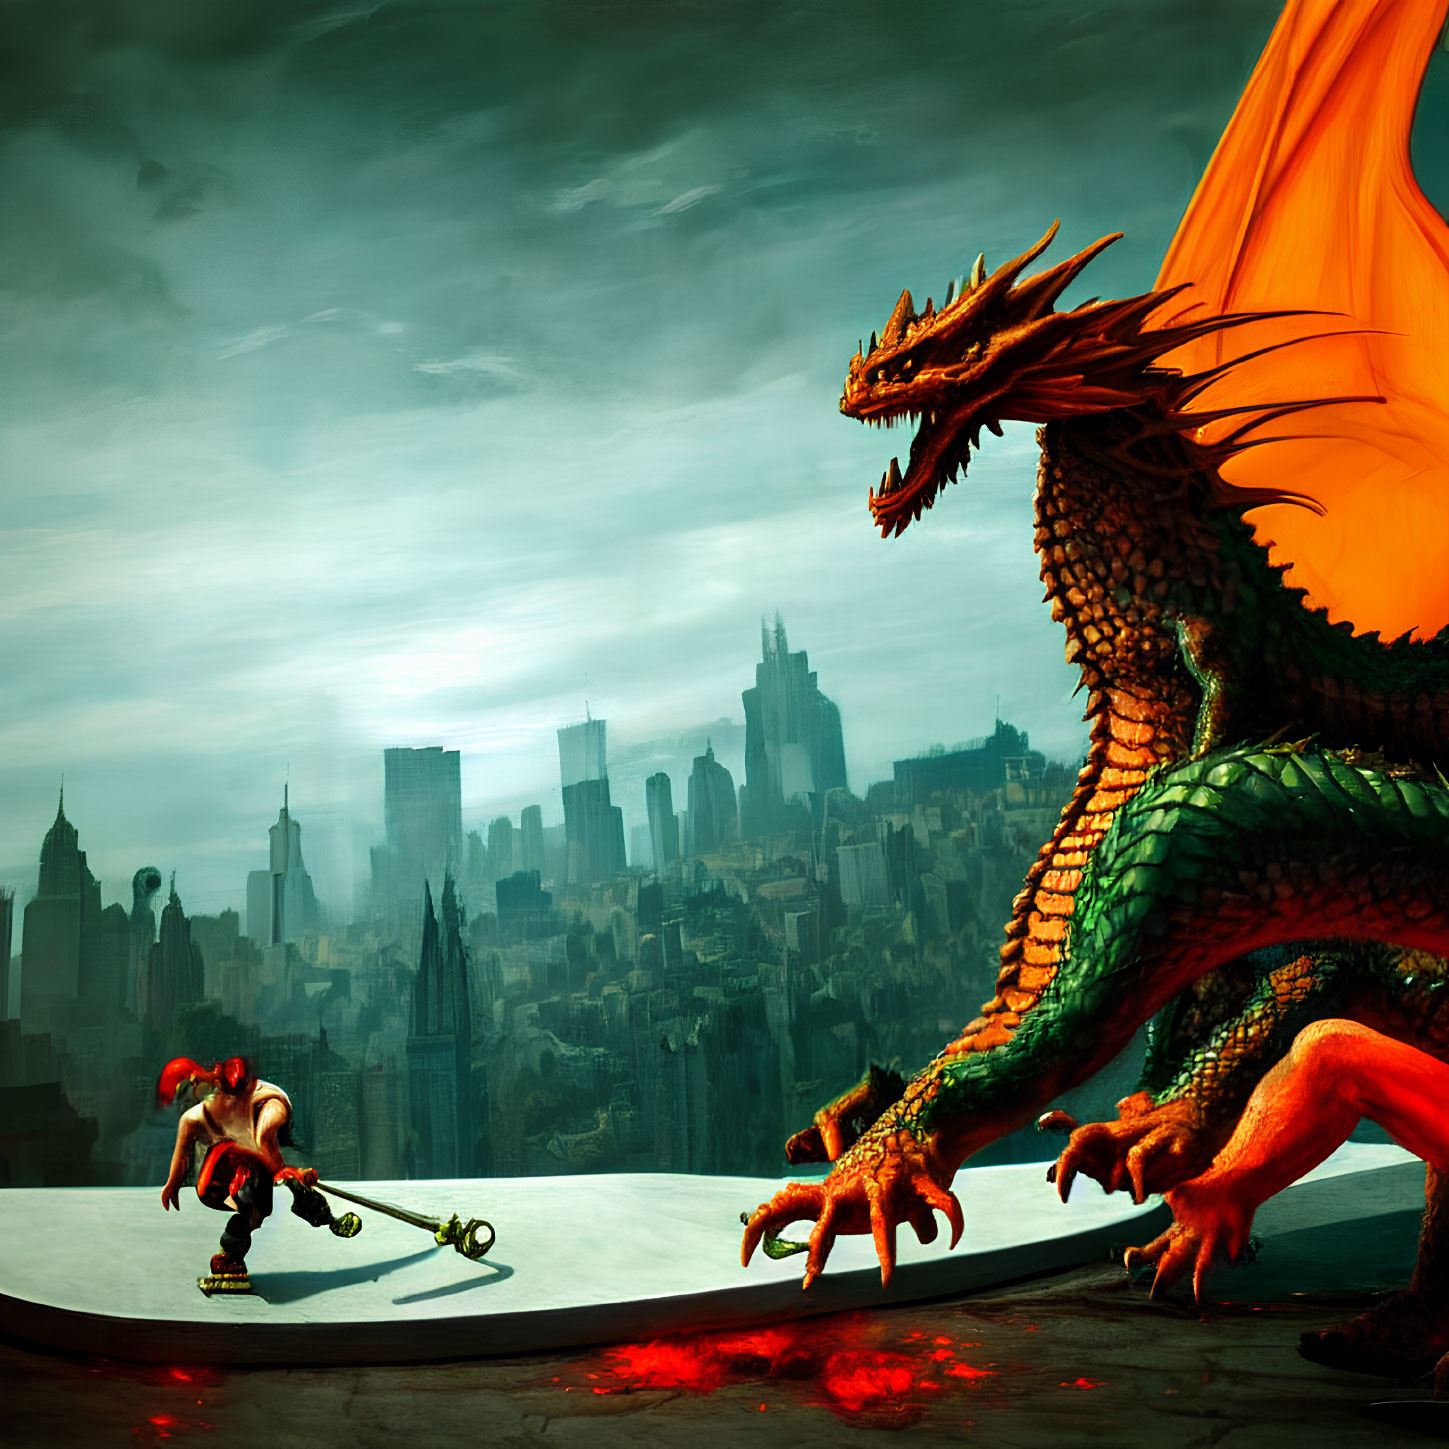 Skateboarder performs trick with dragon in dystopian cityscape